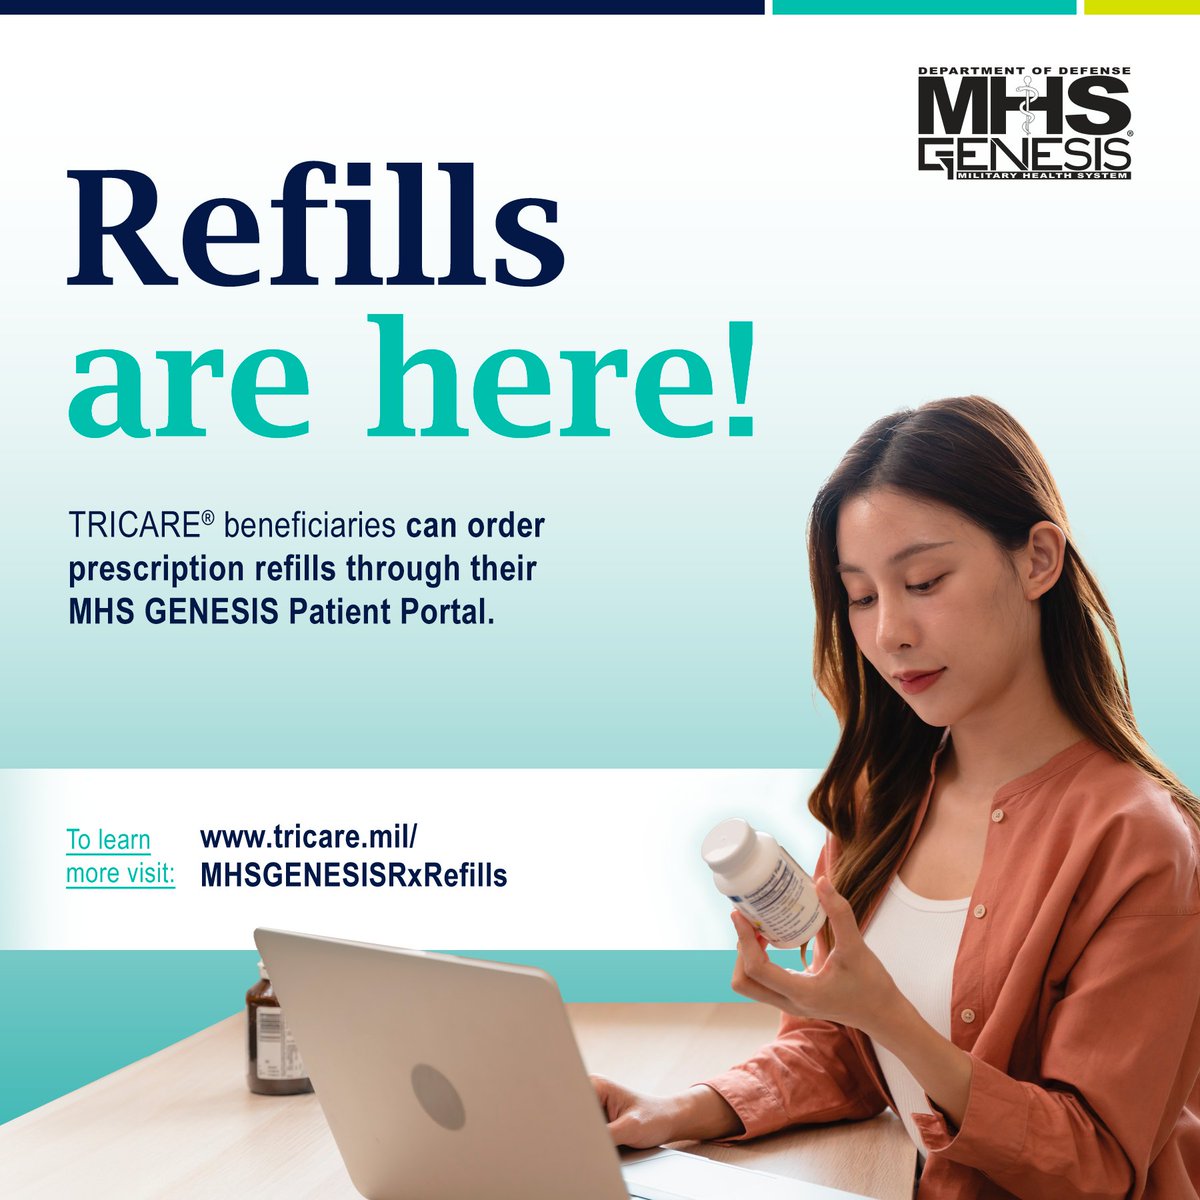 Refilling prescriptions at military pharmacies is easier than ever! The MHS GENESIS Patient Portal lets you view, refill, and check the status of your prescriptions. Learn more about these features at: tricare.mil/MHSGENESISRxRe…